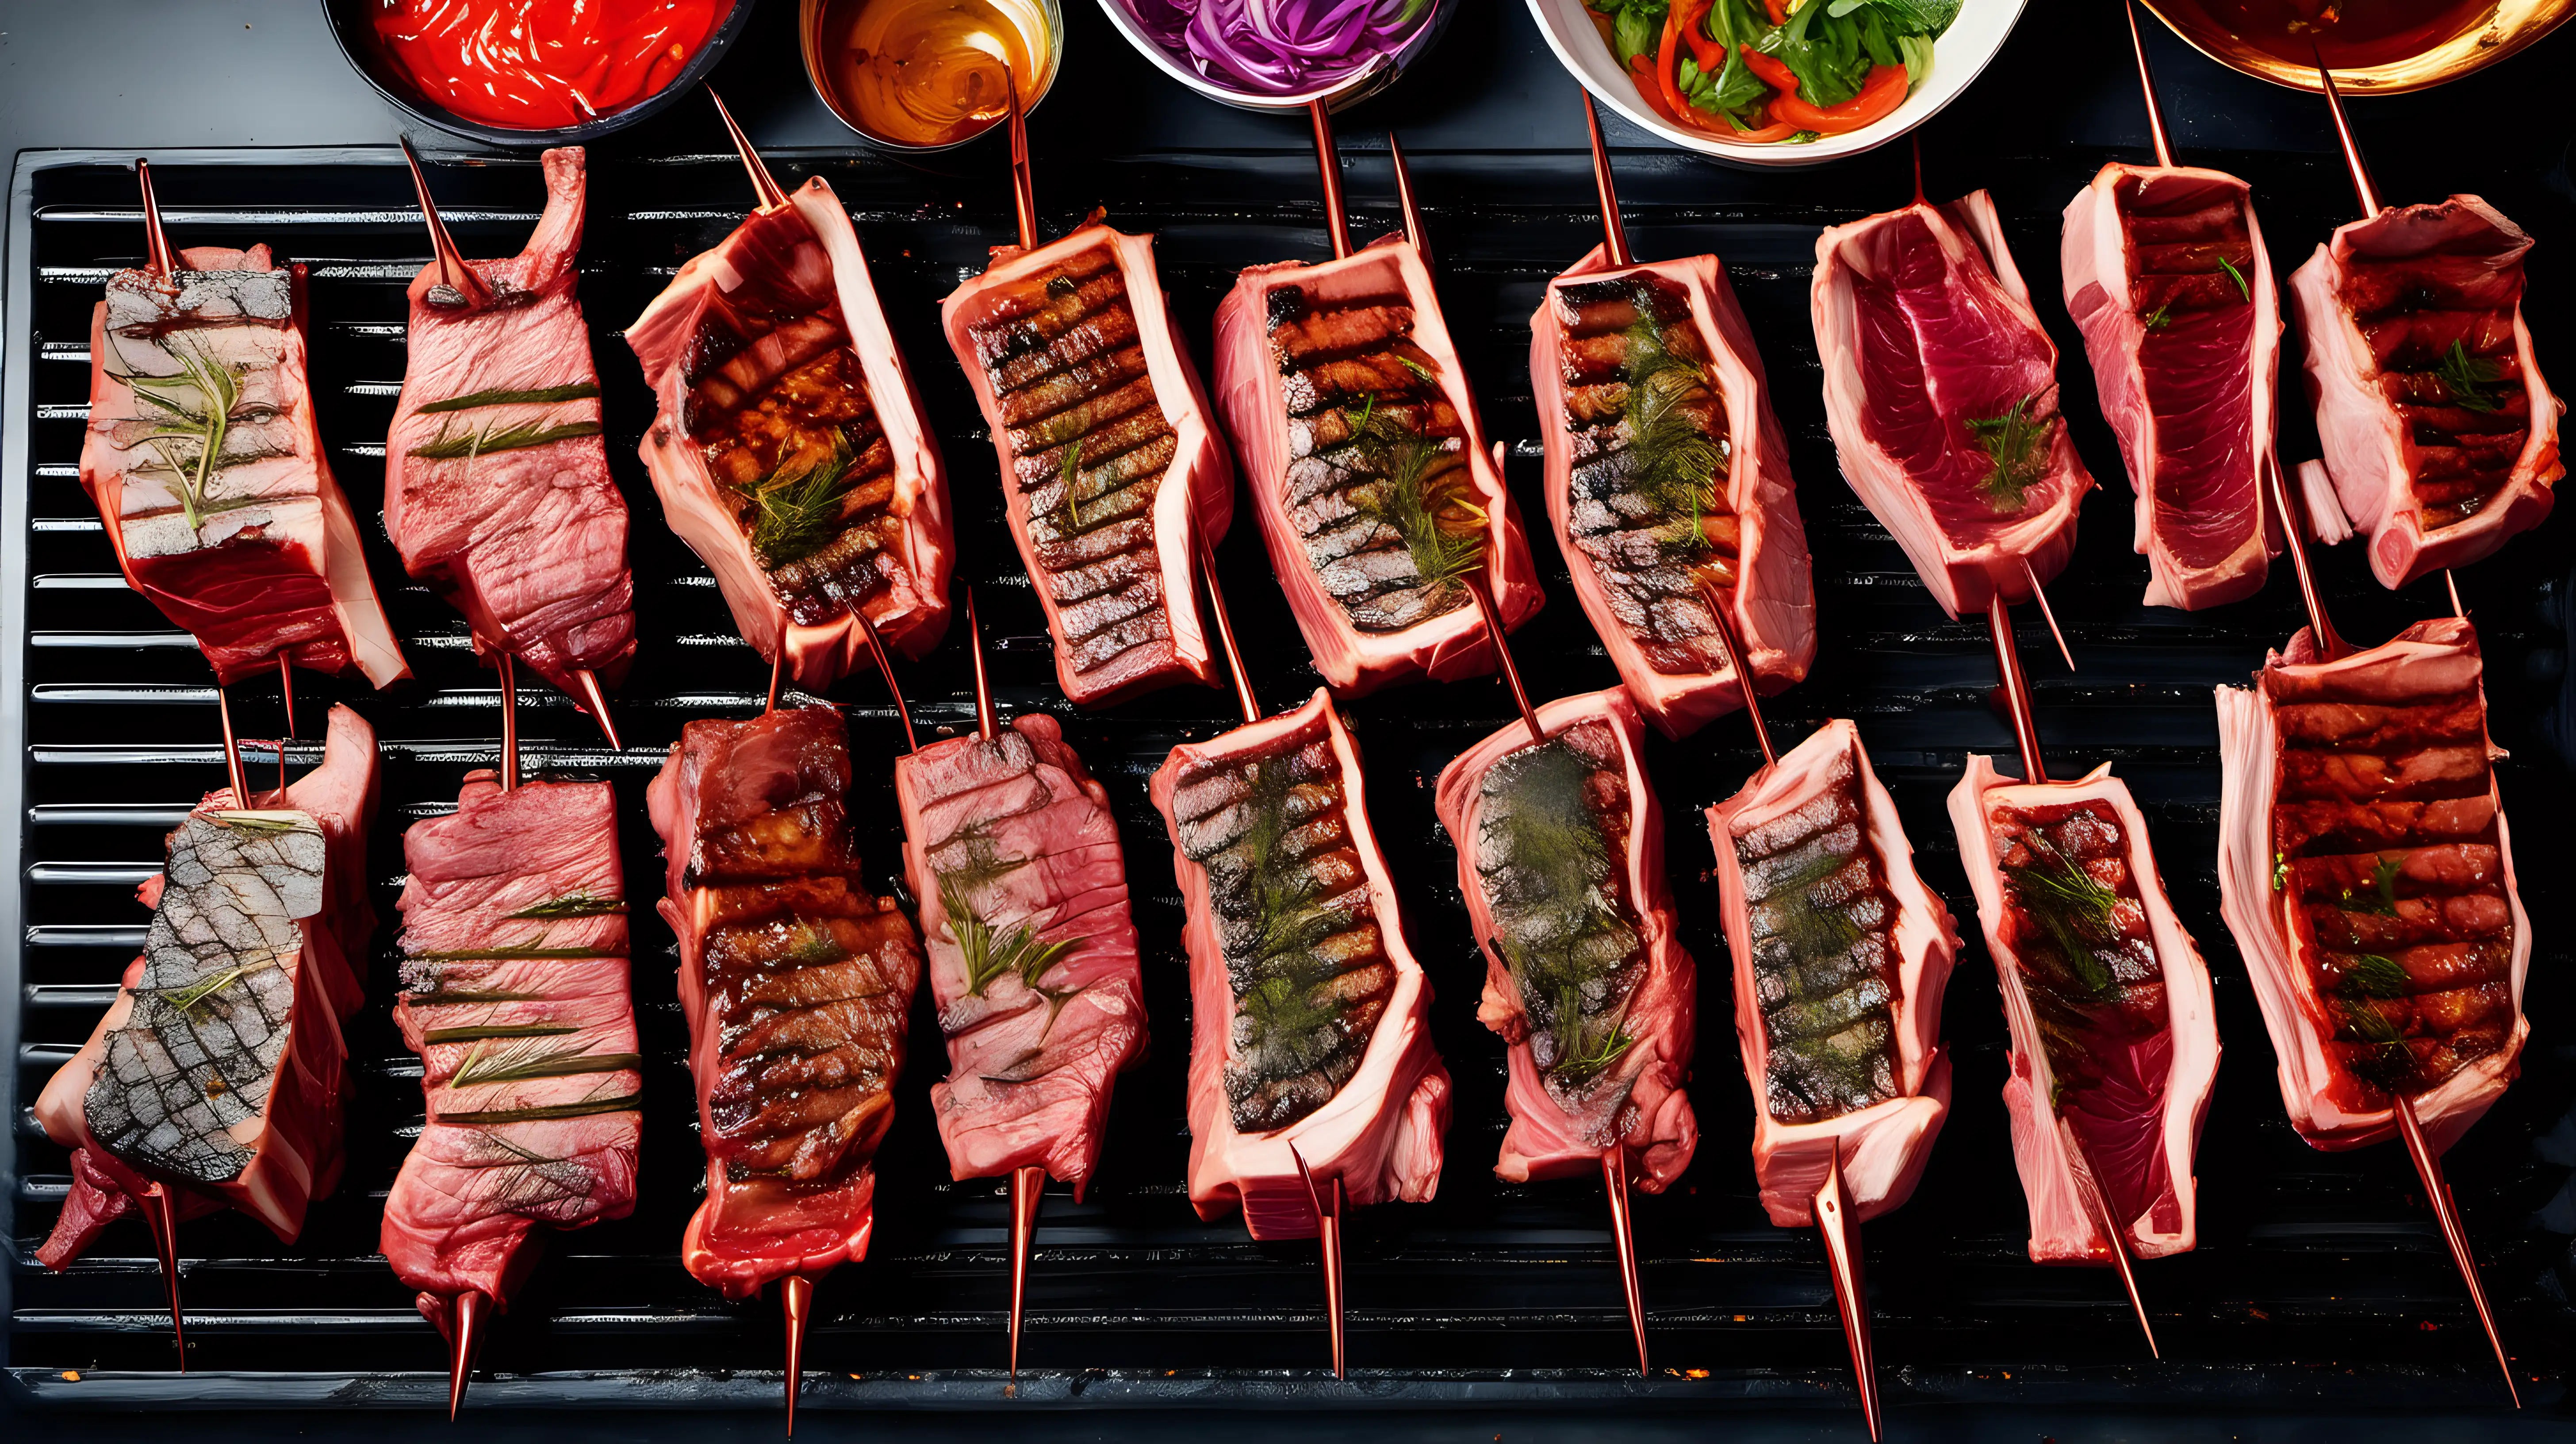 Zoom in on the marinated meat being carefully placed on the grill, showcasing the vibrant colors and textures before they transform into mouthwatering perfection.